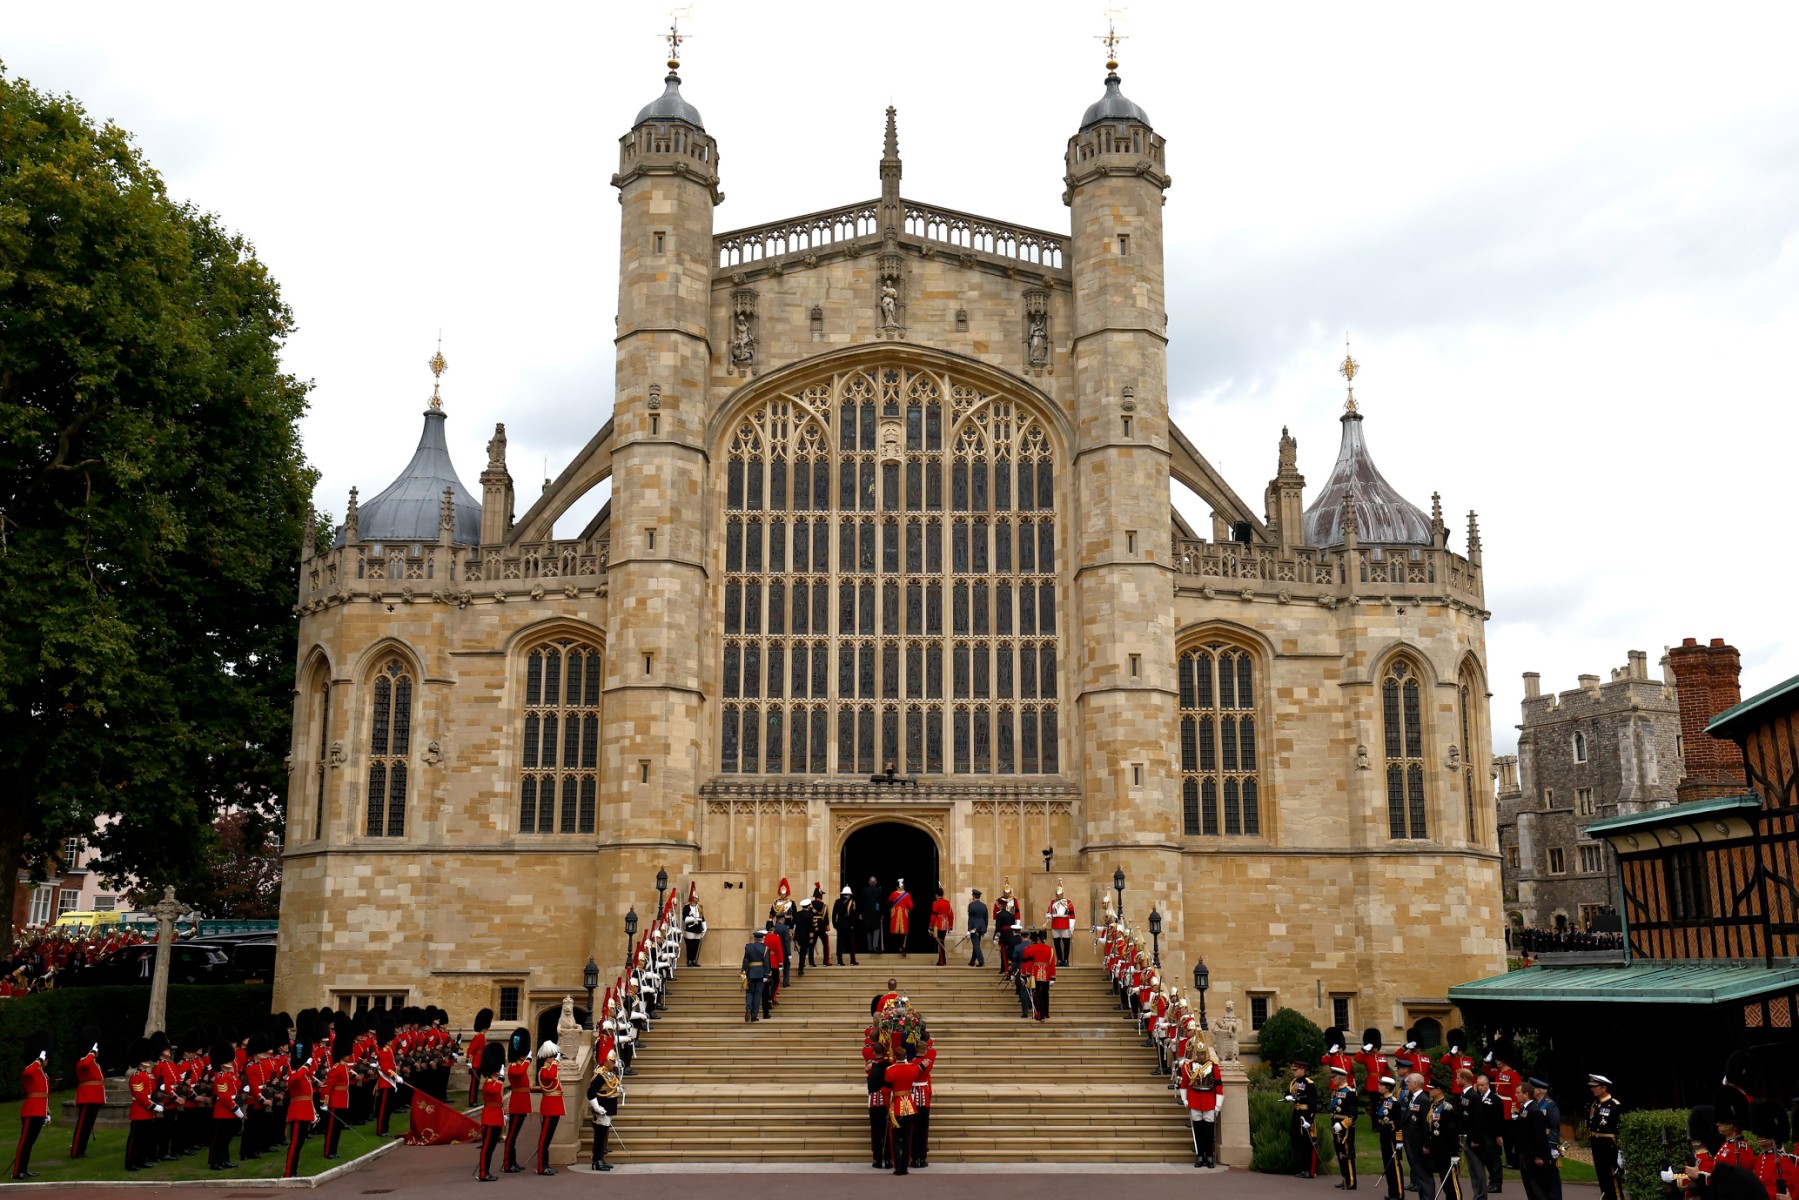 Pall bearers carry the coffin of Queen Elizabeth II with the Imperial State Crown resting on top into St. George's Chapel at Windsor Castle on September 19, 2022 in Windsor, west of London, after making its final journey to Windsor Castle after the State Funeral Service.